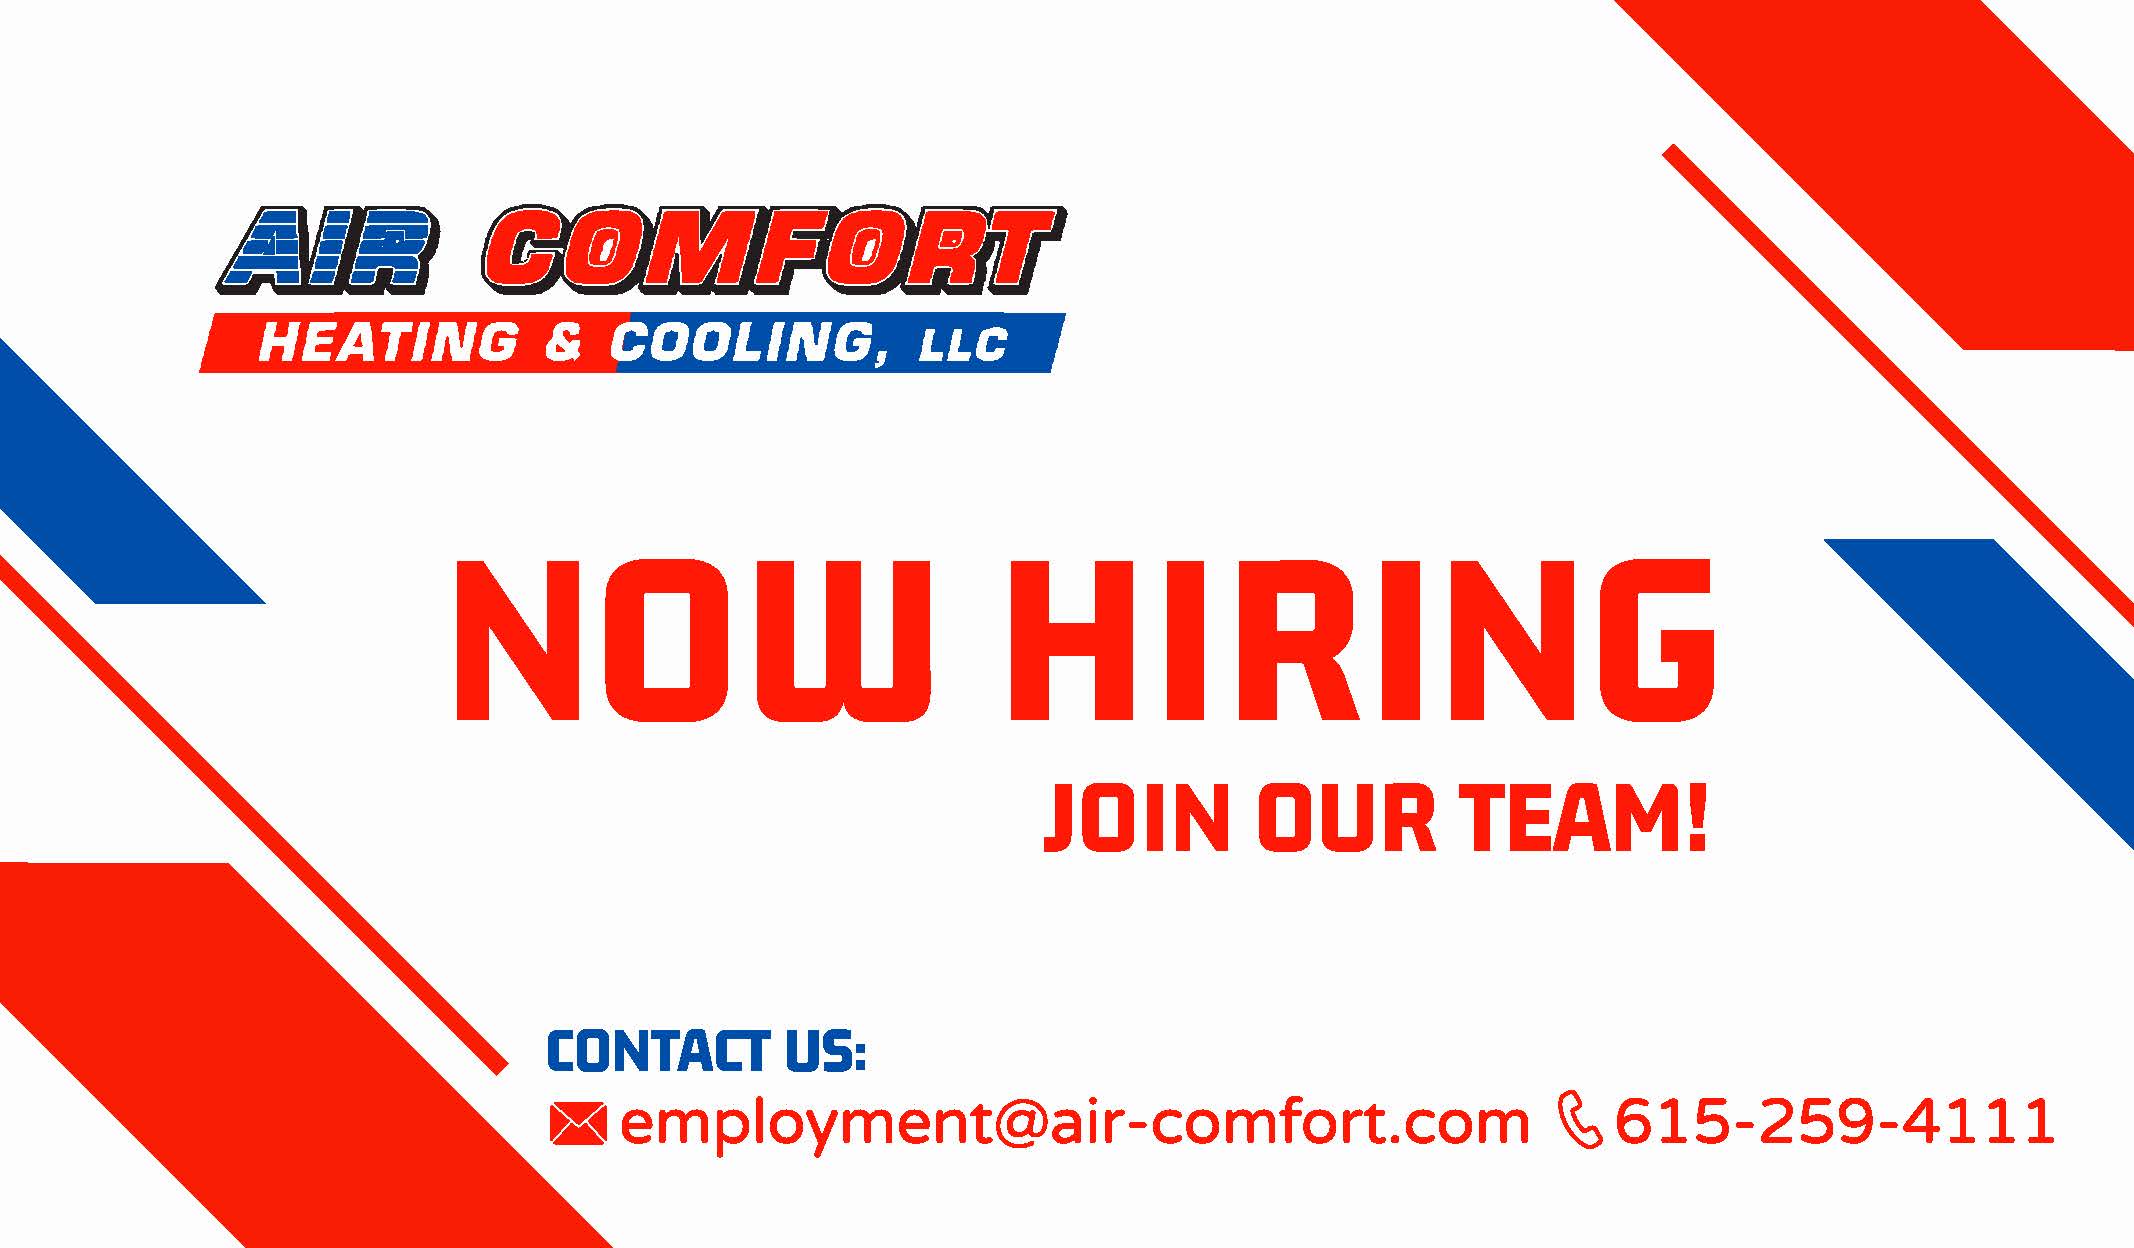 HVAC Careers - Air Comfort Heating and Cooling Now Hiring. Join our Team. Start your Career!